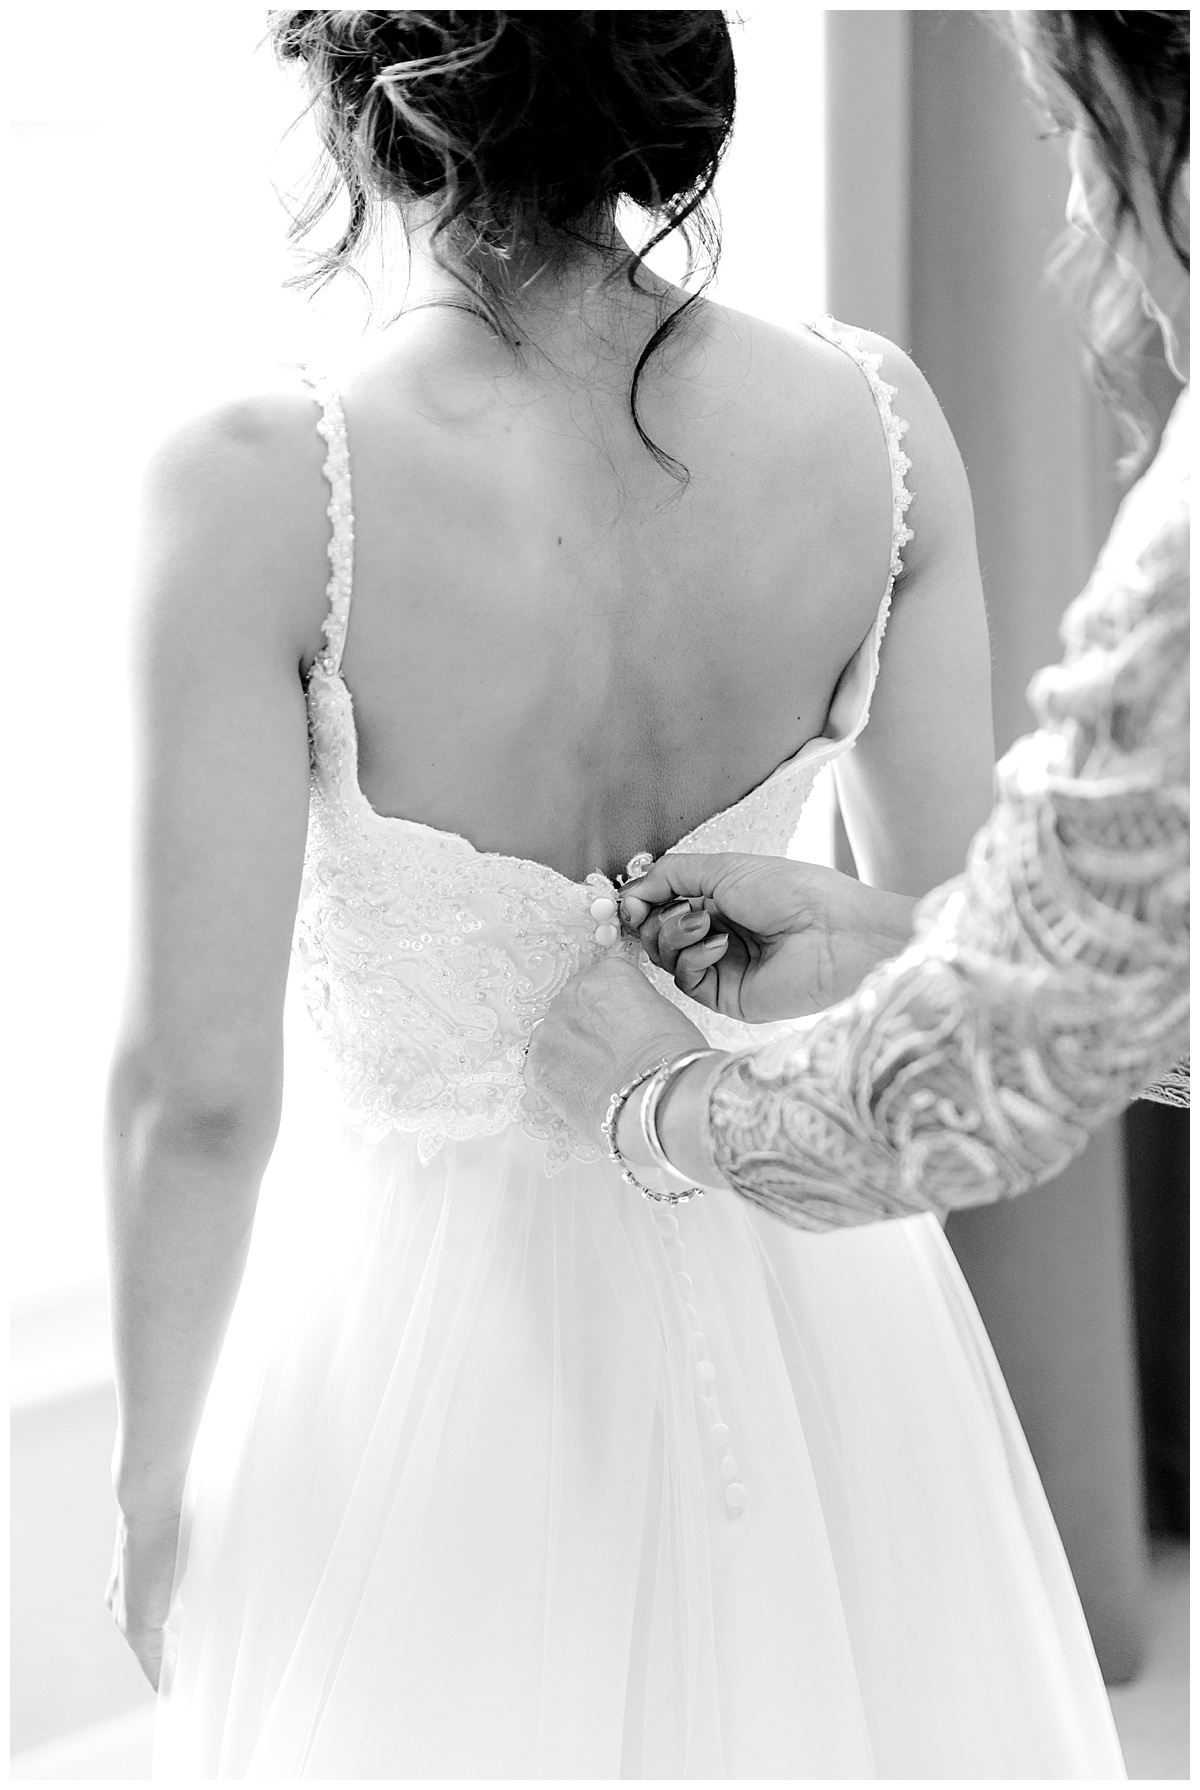 Black and white shot of back of bride's dress while mother zips it up at Hyatt Regency Hill Country Resort Wedding in San Antonio, TX | San Antonio Wedding photographer| Destination Wedding Photographer| Monica Roberts Photography | monicaroberts.com